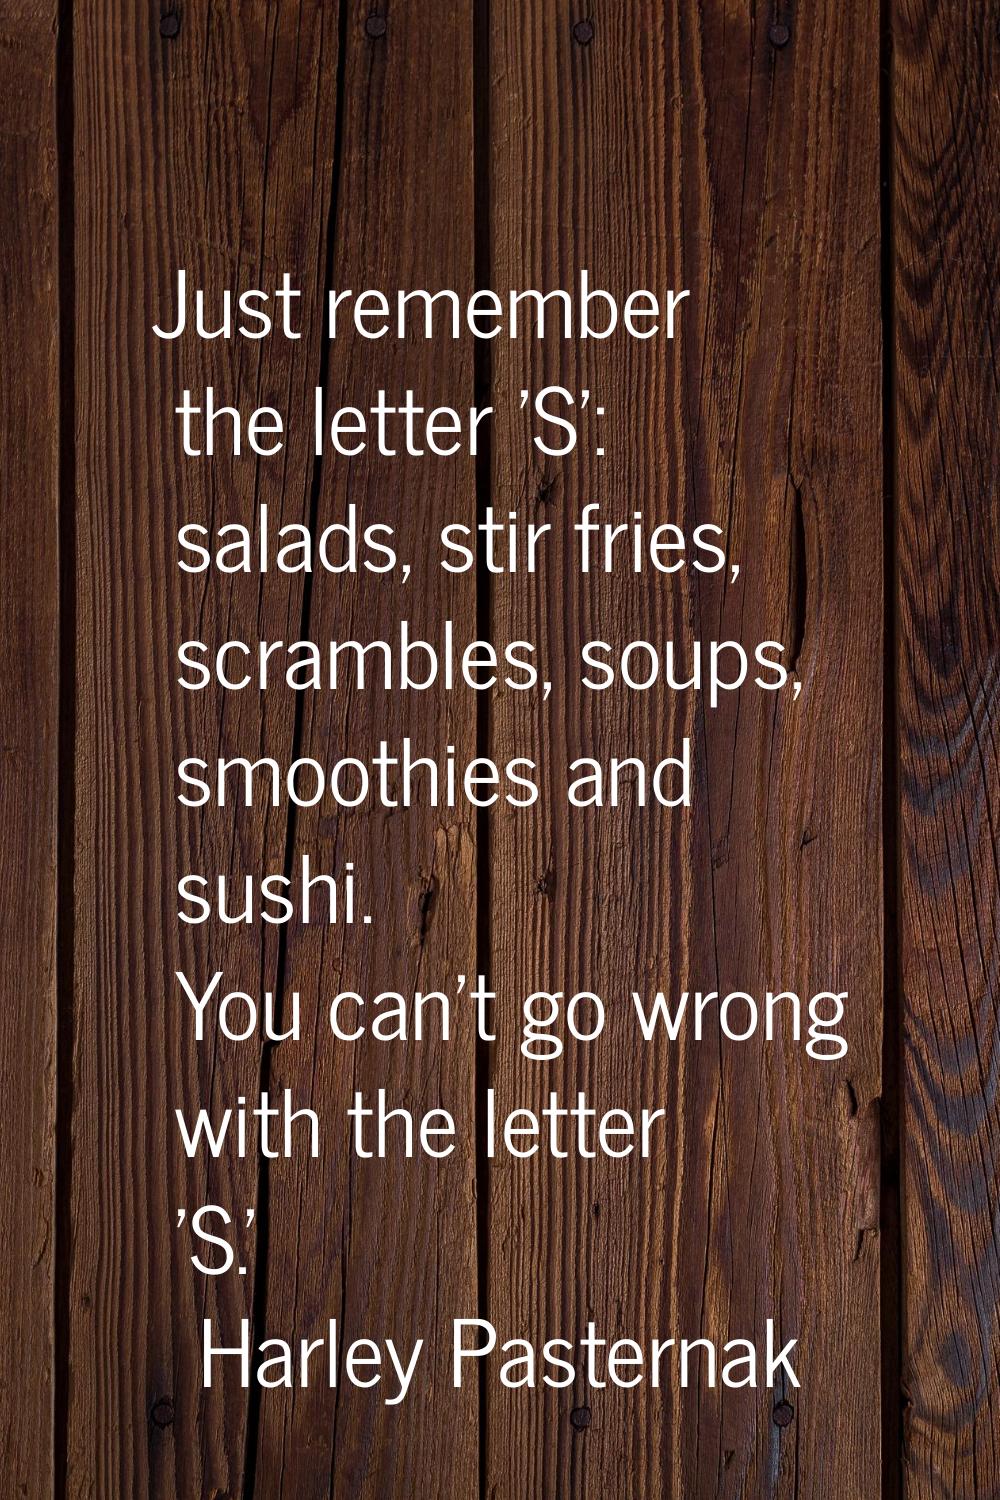 Just remember the letter 'S': salads, stir fries, scrambles, soups, smoothies and sushi. You can't 